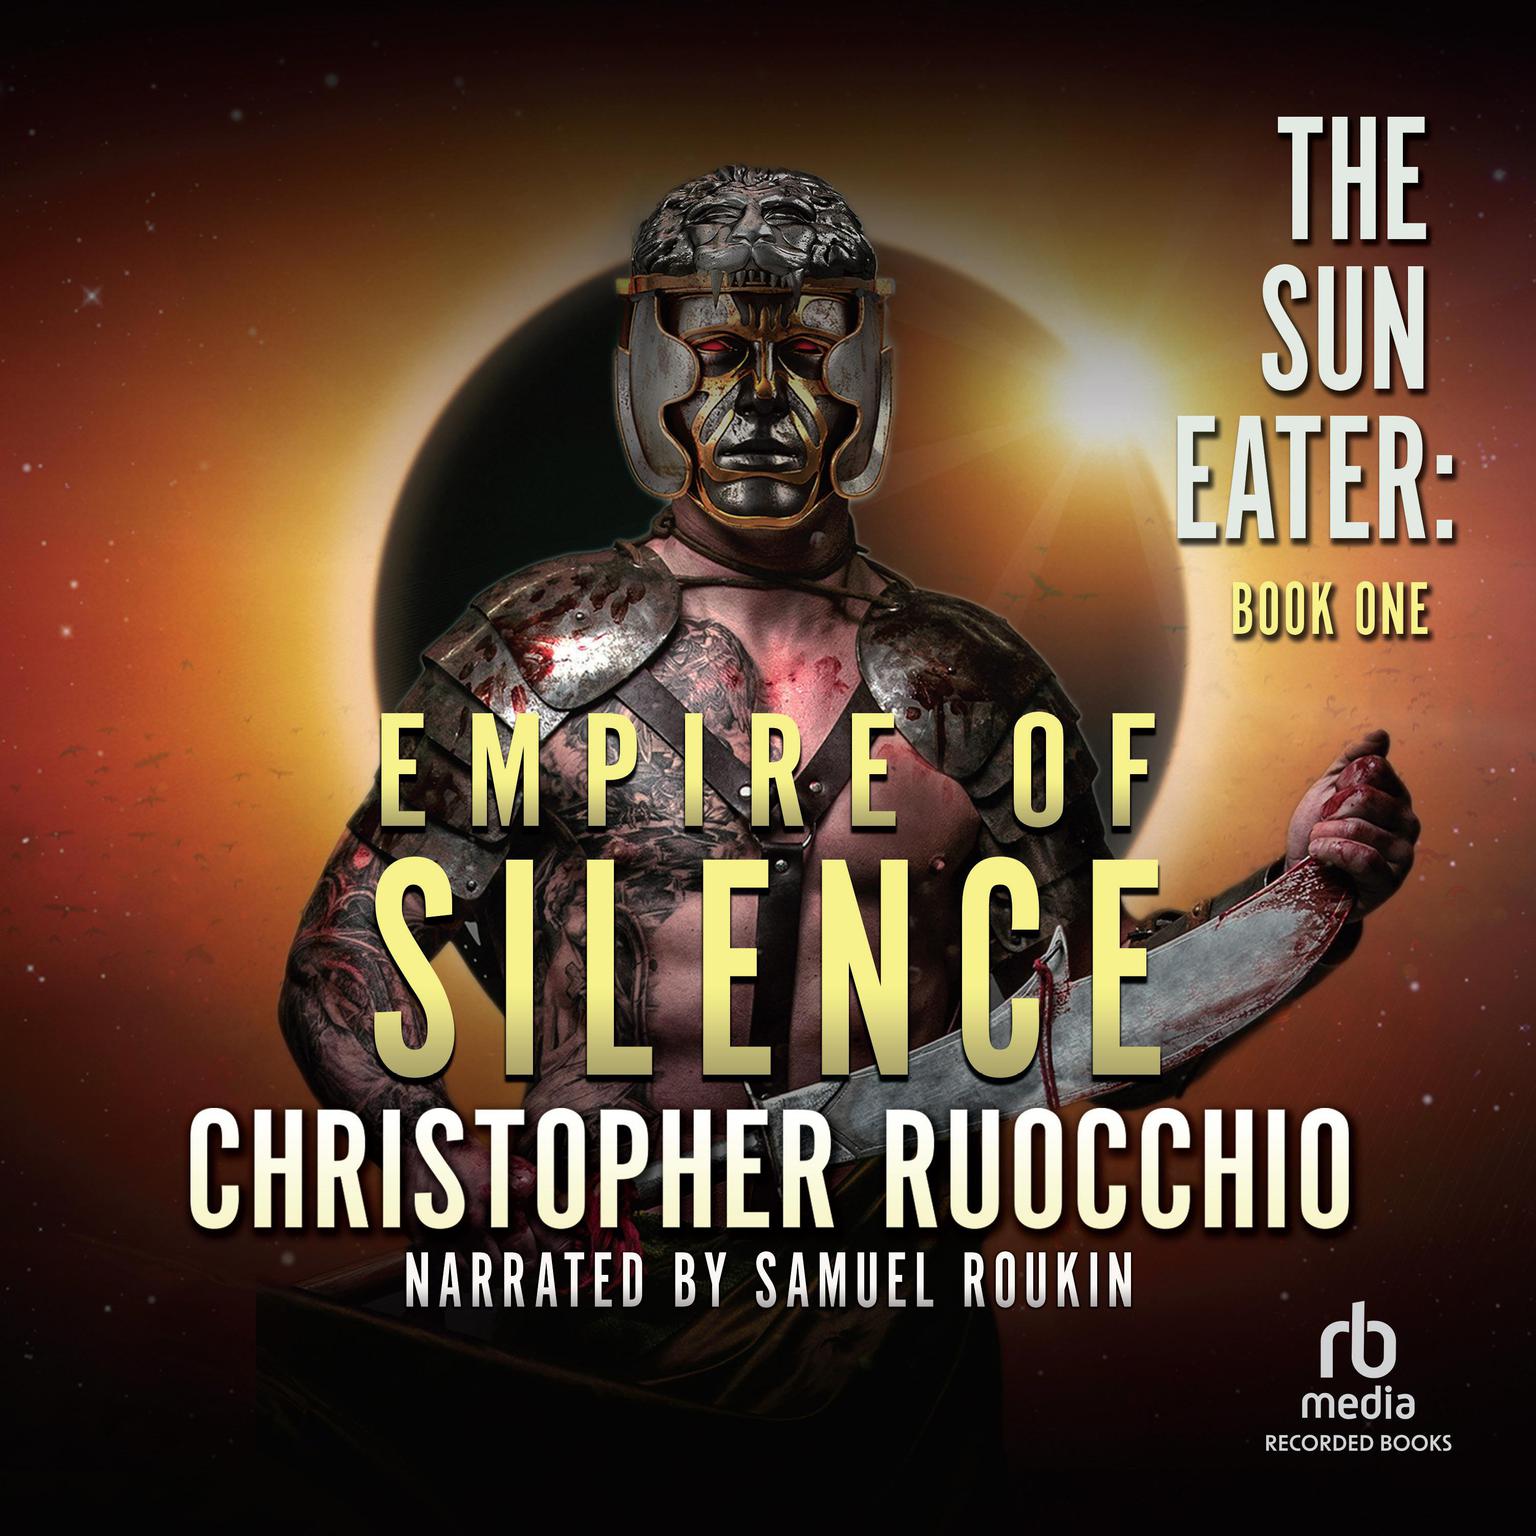 Empire of Silence Audiobook, by Christopher Ruocchio